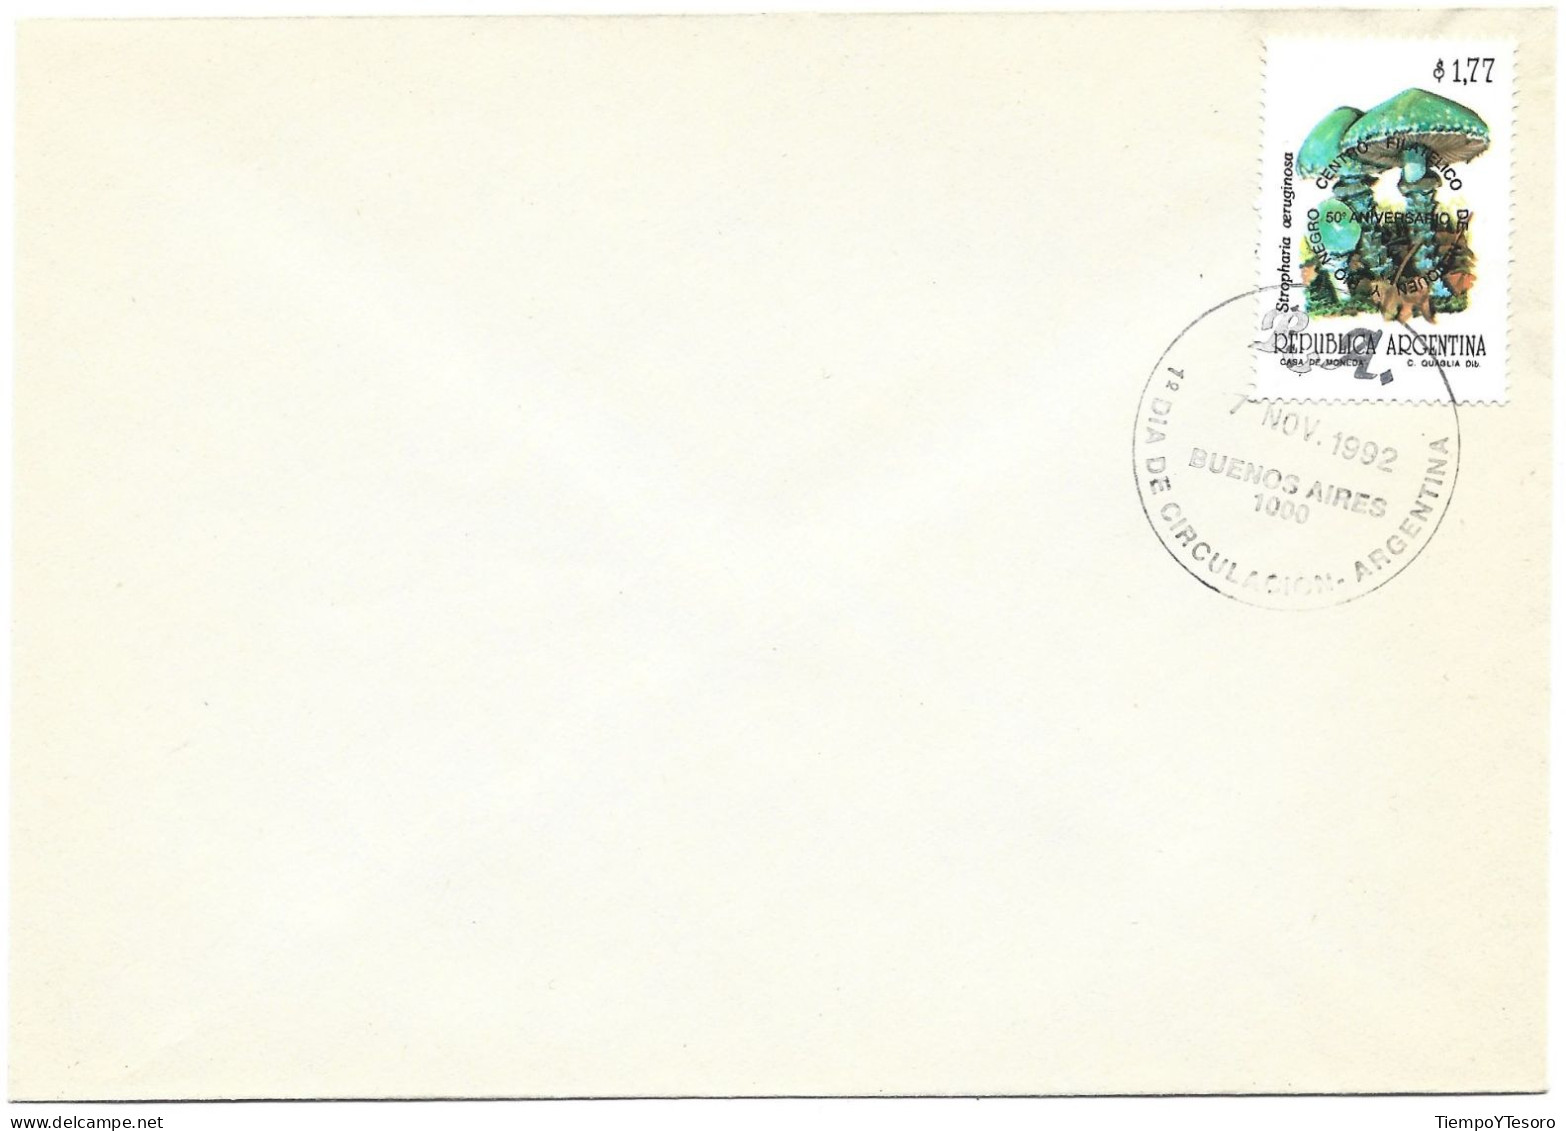 First Day Cover - Argentina, Stropharia Oeruginosa, 1992, N°300 - FDC